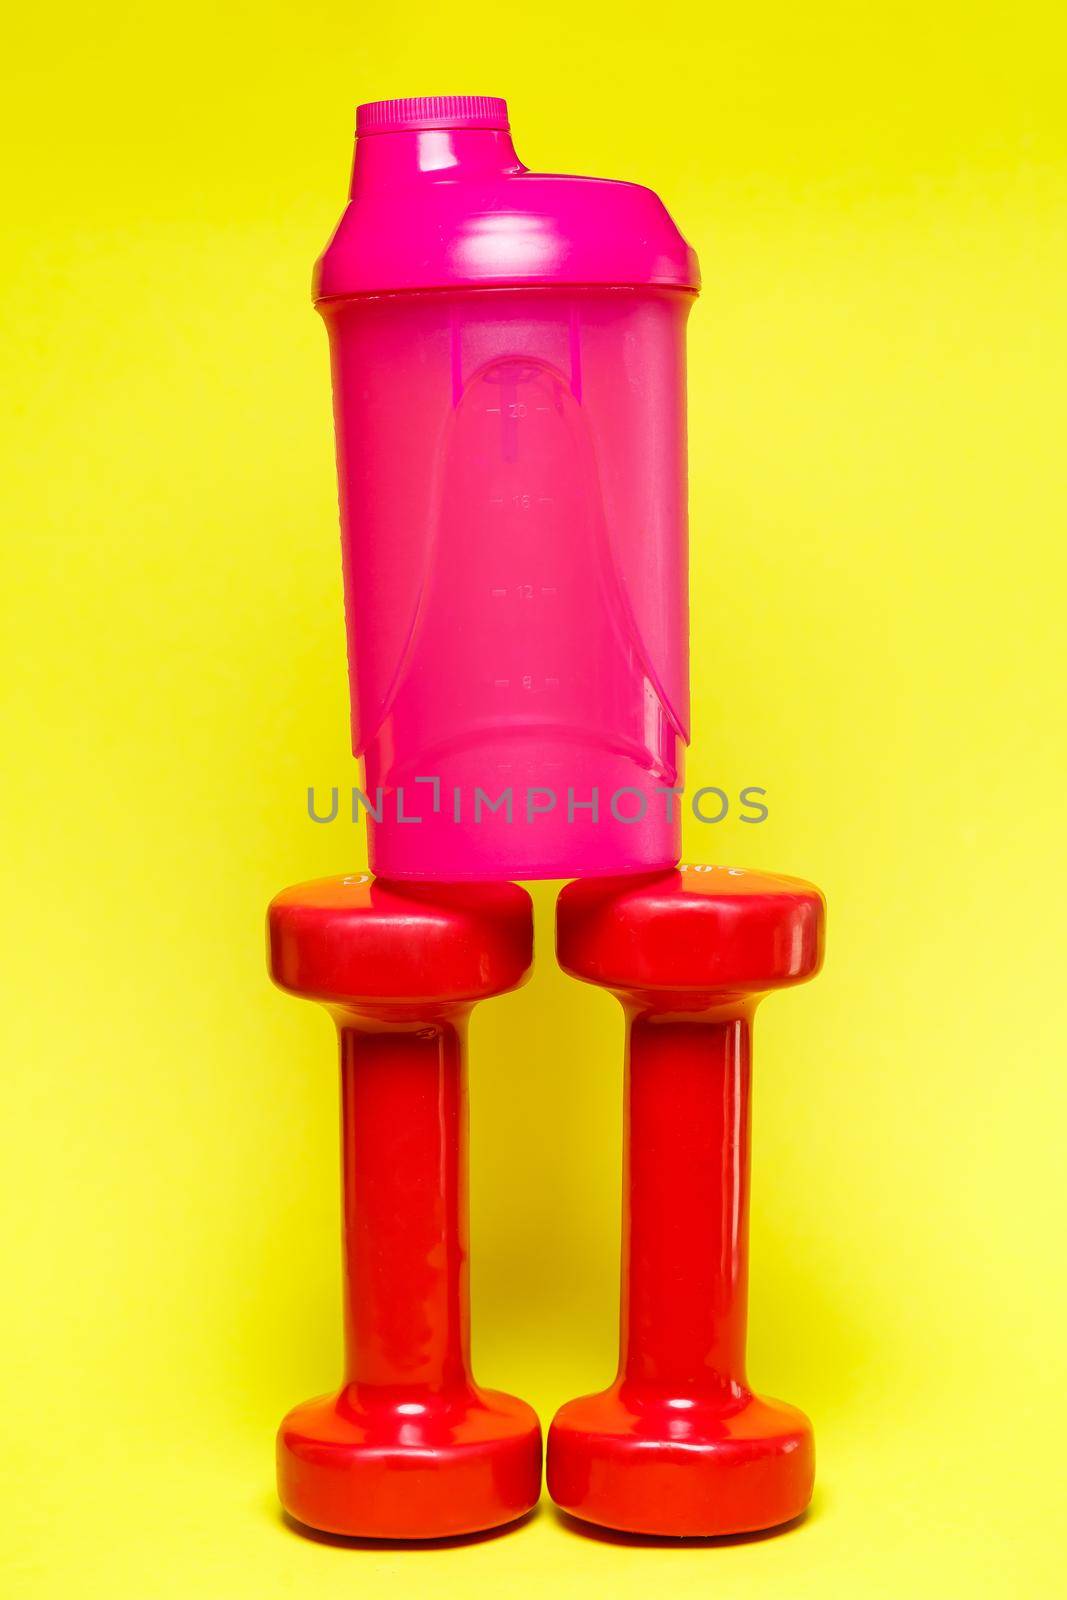 red dumbbells, pink shaker, colored background, sports, energy drink, gym equipment by Dmitrytph